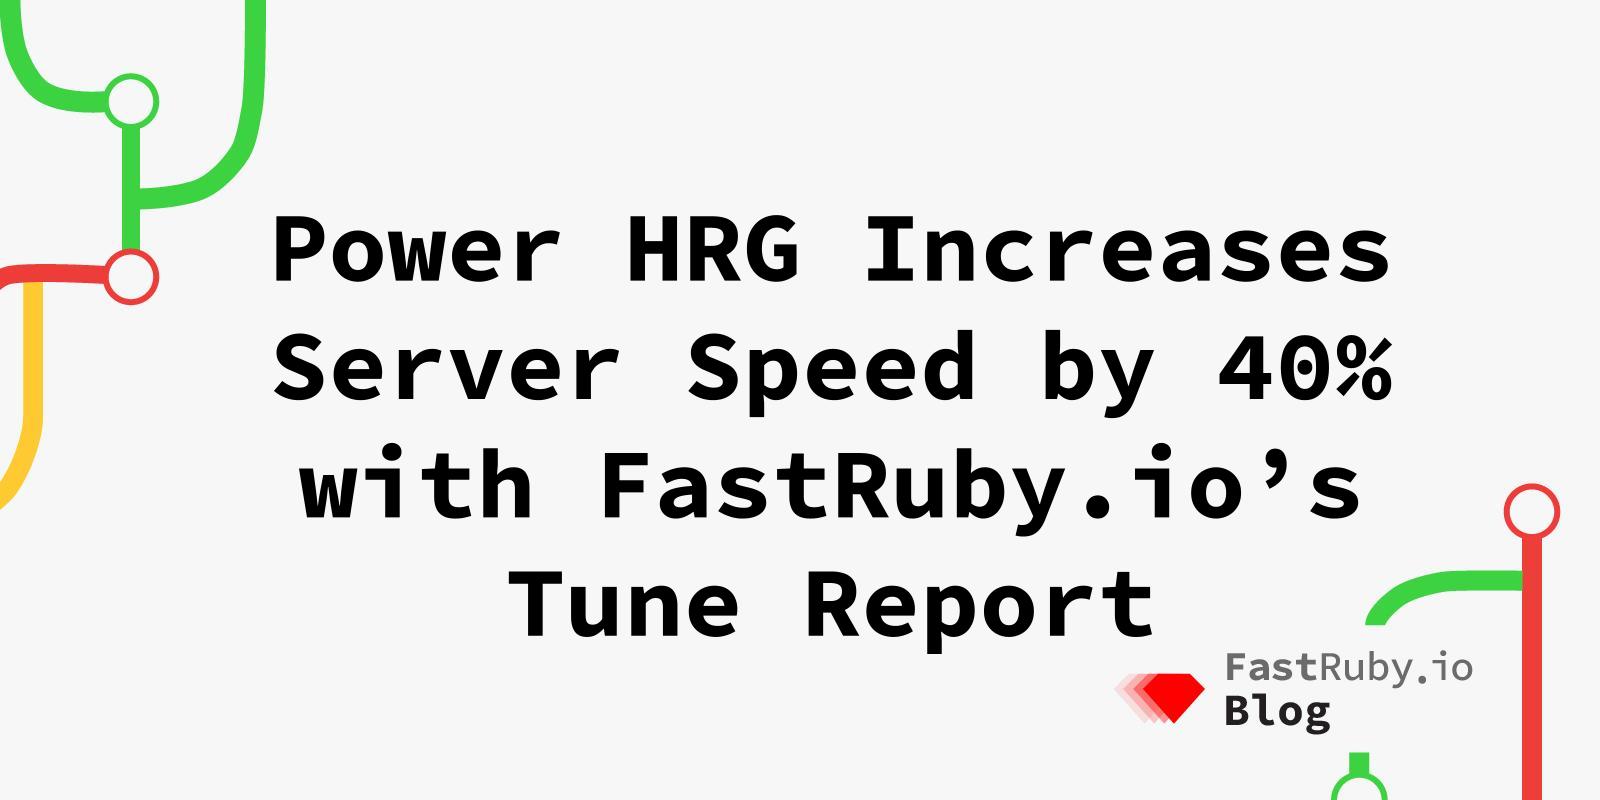 Power Home Remodeling Increases Server Speed by 40% with FastRuby.io's Tune Report